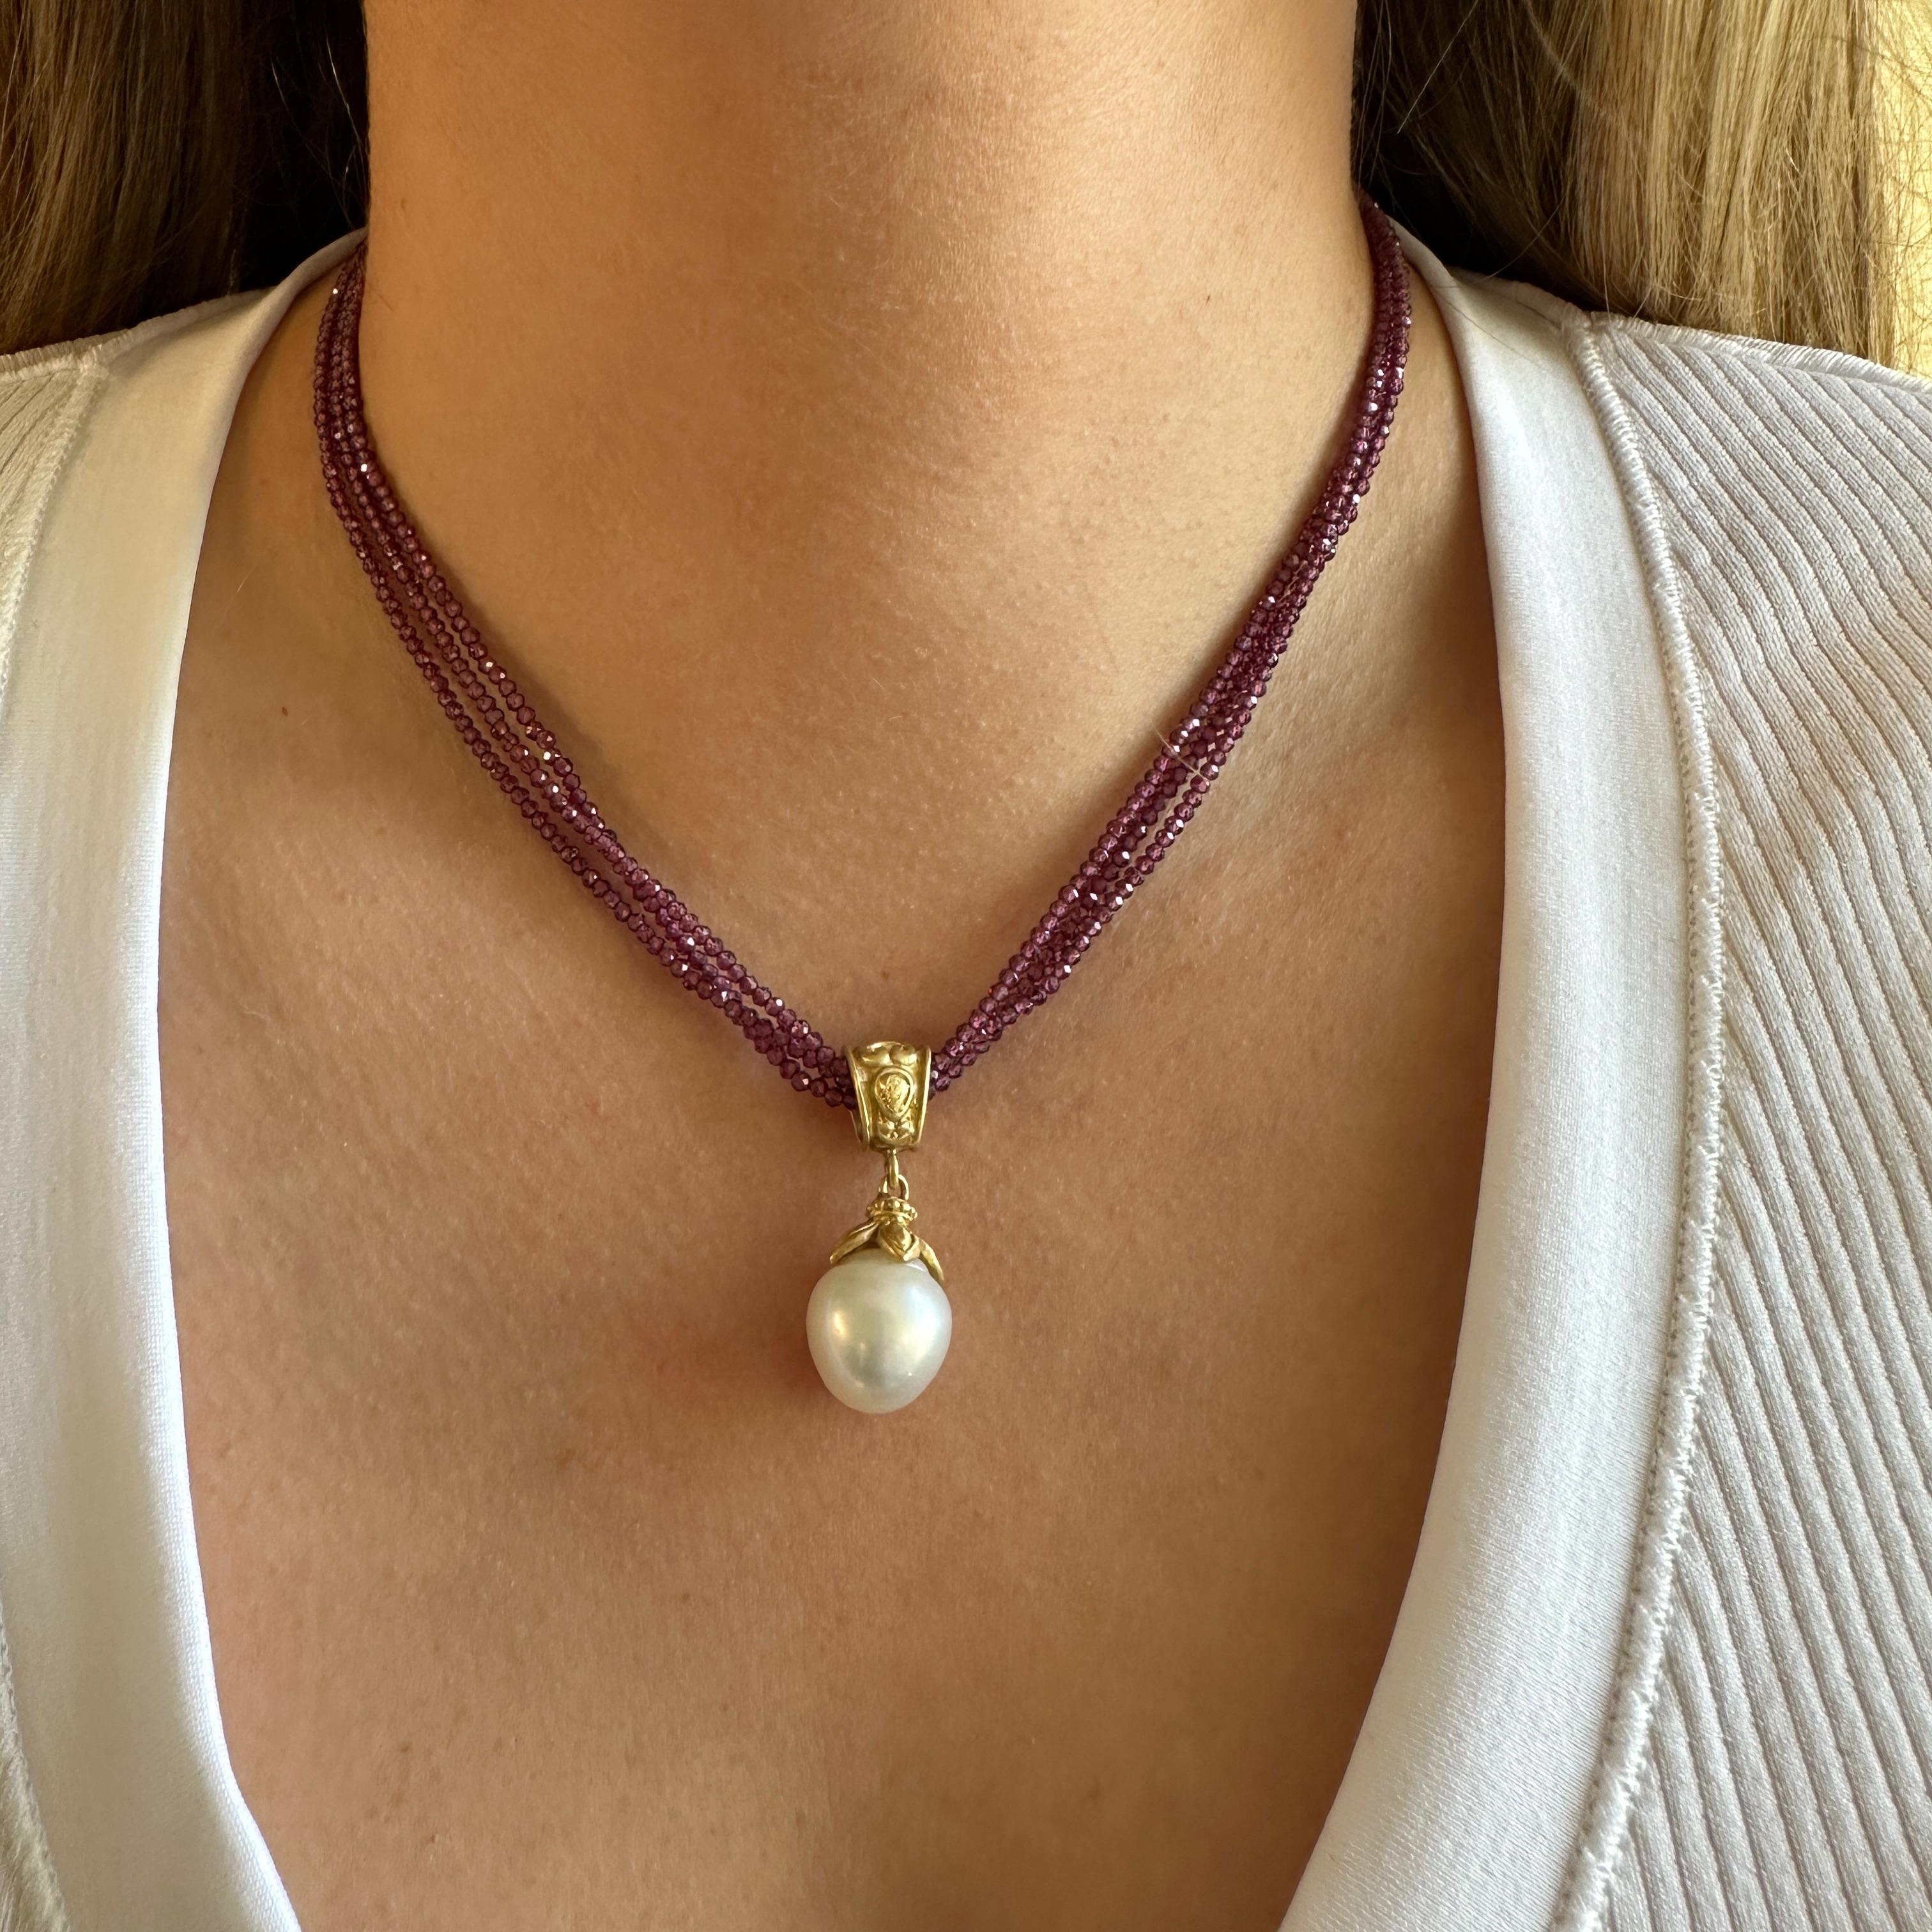 Baroque 13mm South Sea Pearl in 18K Gold Fob Pendant with Rhodolite Necklace In New Condition For Sale In Sherman Oaks, CA